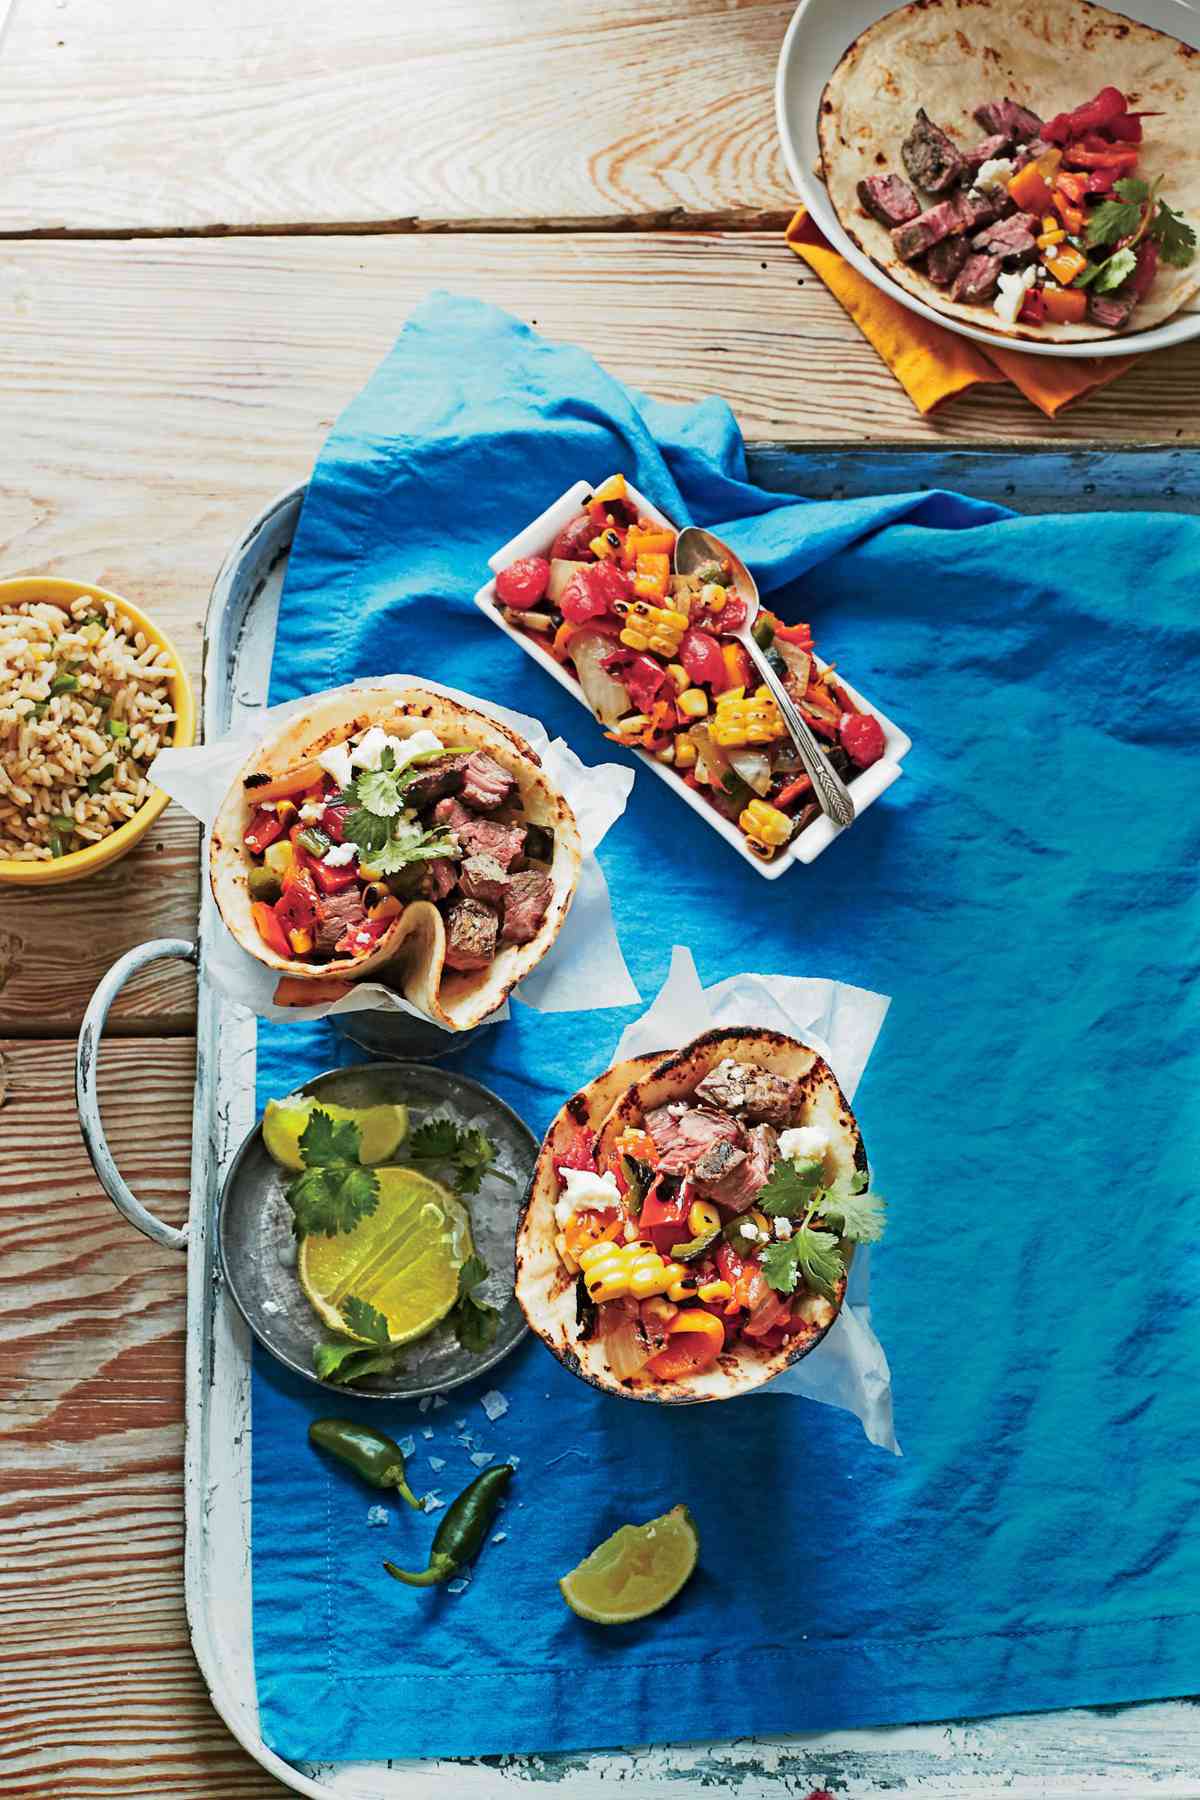 Friday: Steak Tacos with Charred Salsa